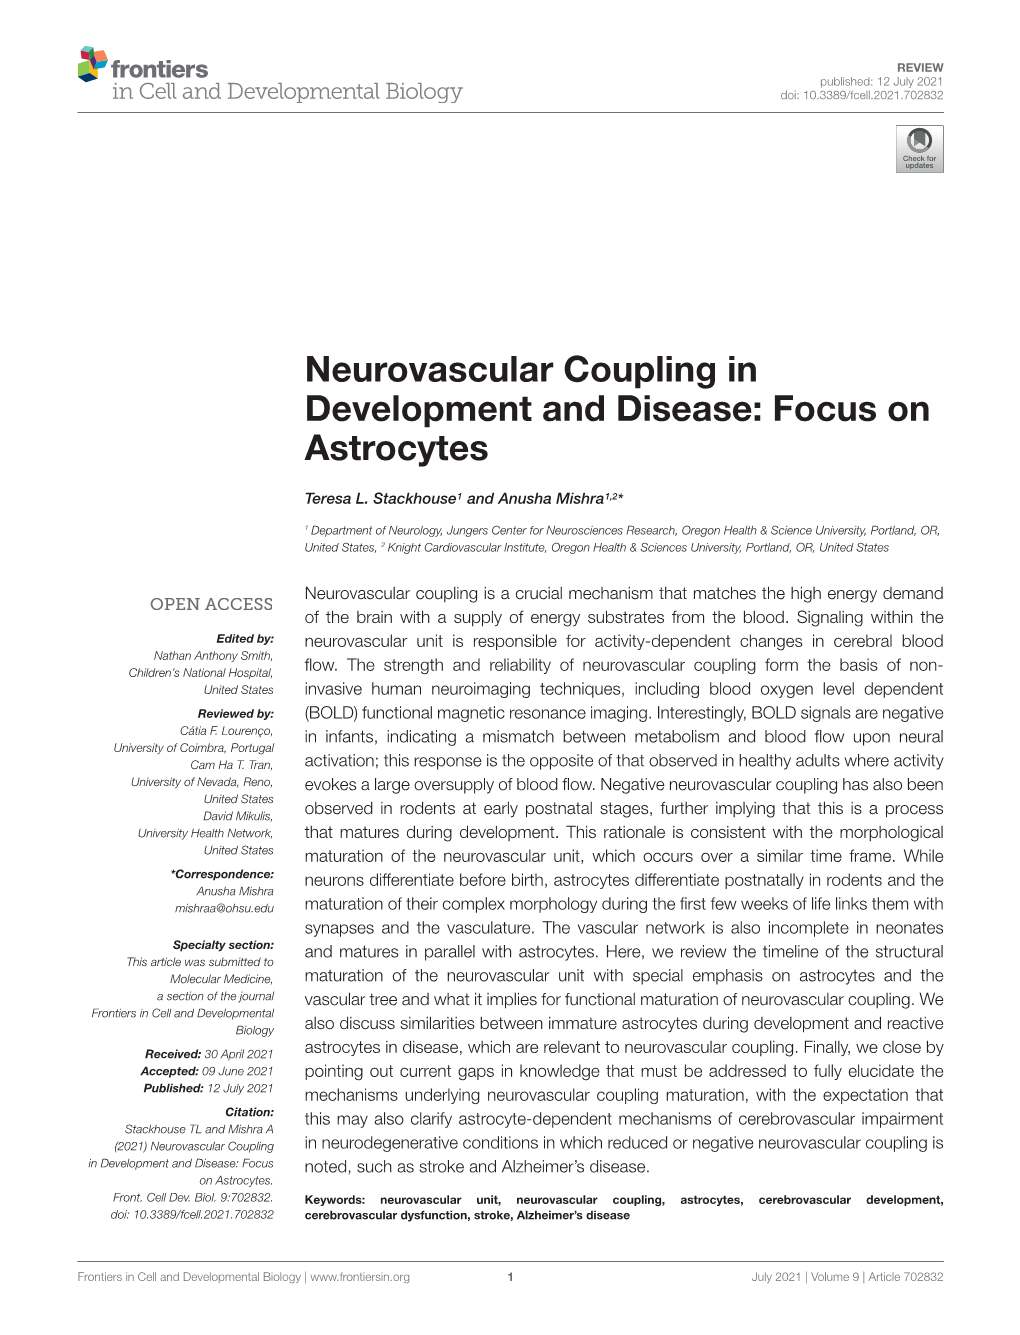 Neurovascular Coupling in Development and Disease: Focus on Astrocytes